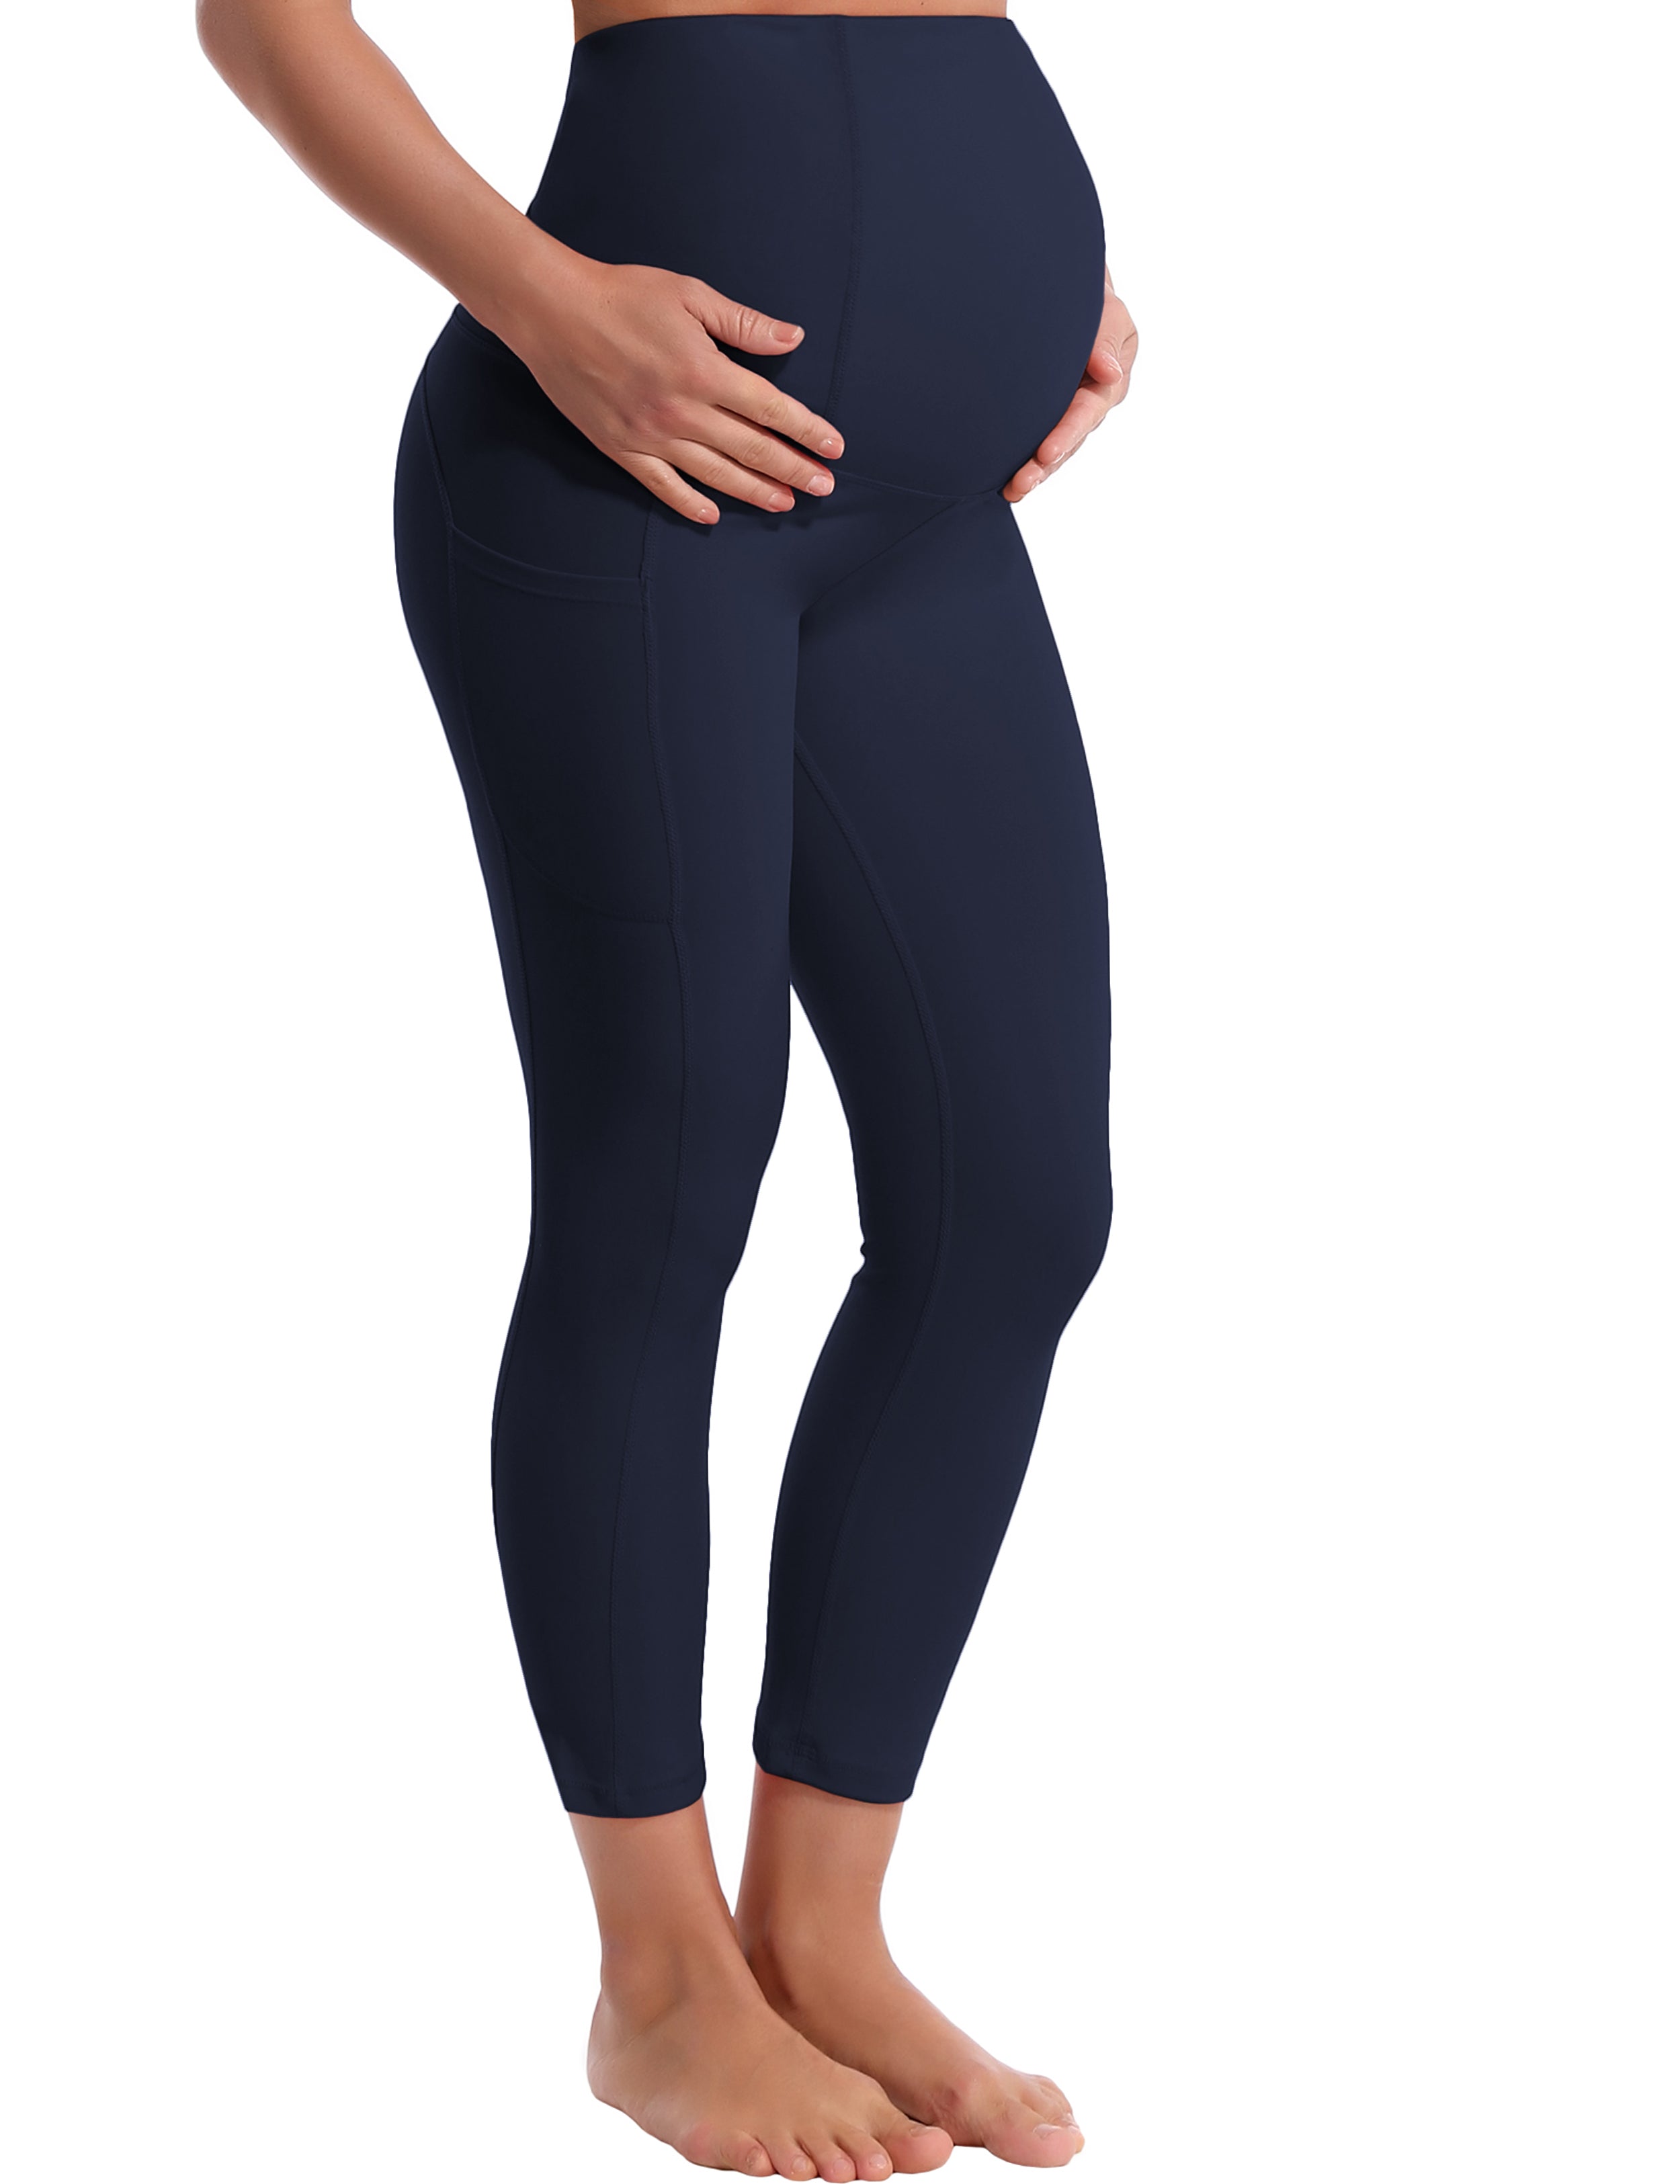 22" Side Pockets Maternity Yoga Pants darknavy 87%Nylon/13%Spandex Softest-ever fabric High elasticity 4-way stretch Fabric doesn't attract lint easily No see-through Moisture-wicking Machine wash